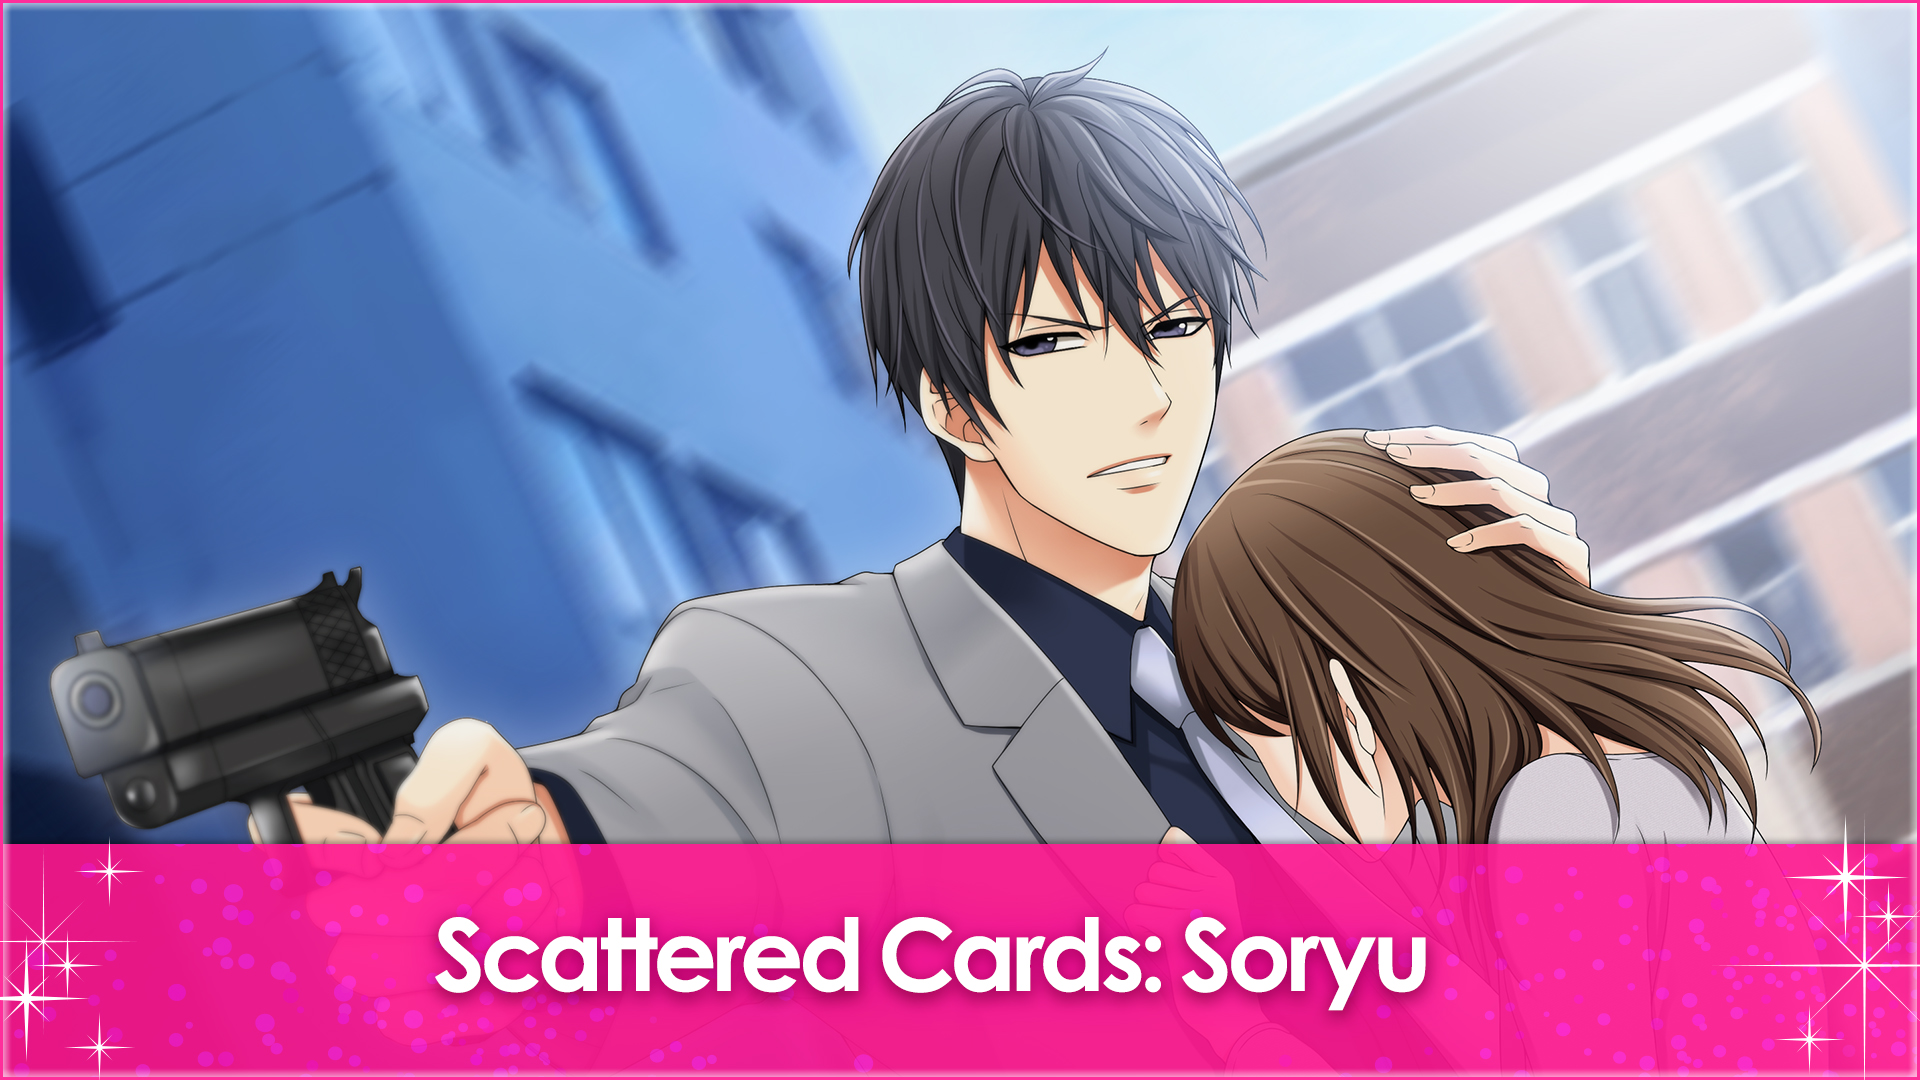 Scattered Cards: Soryu